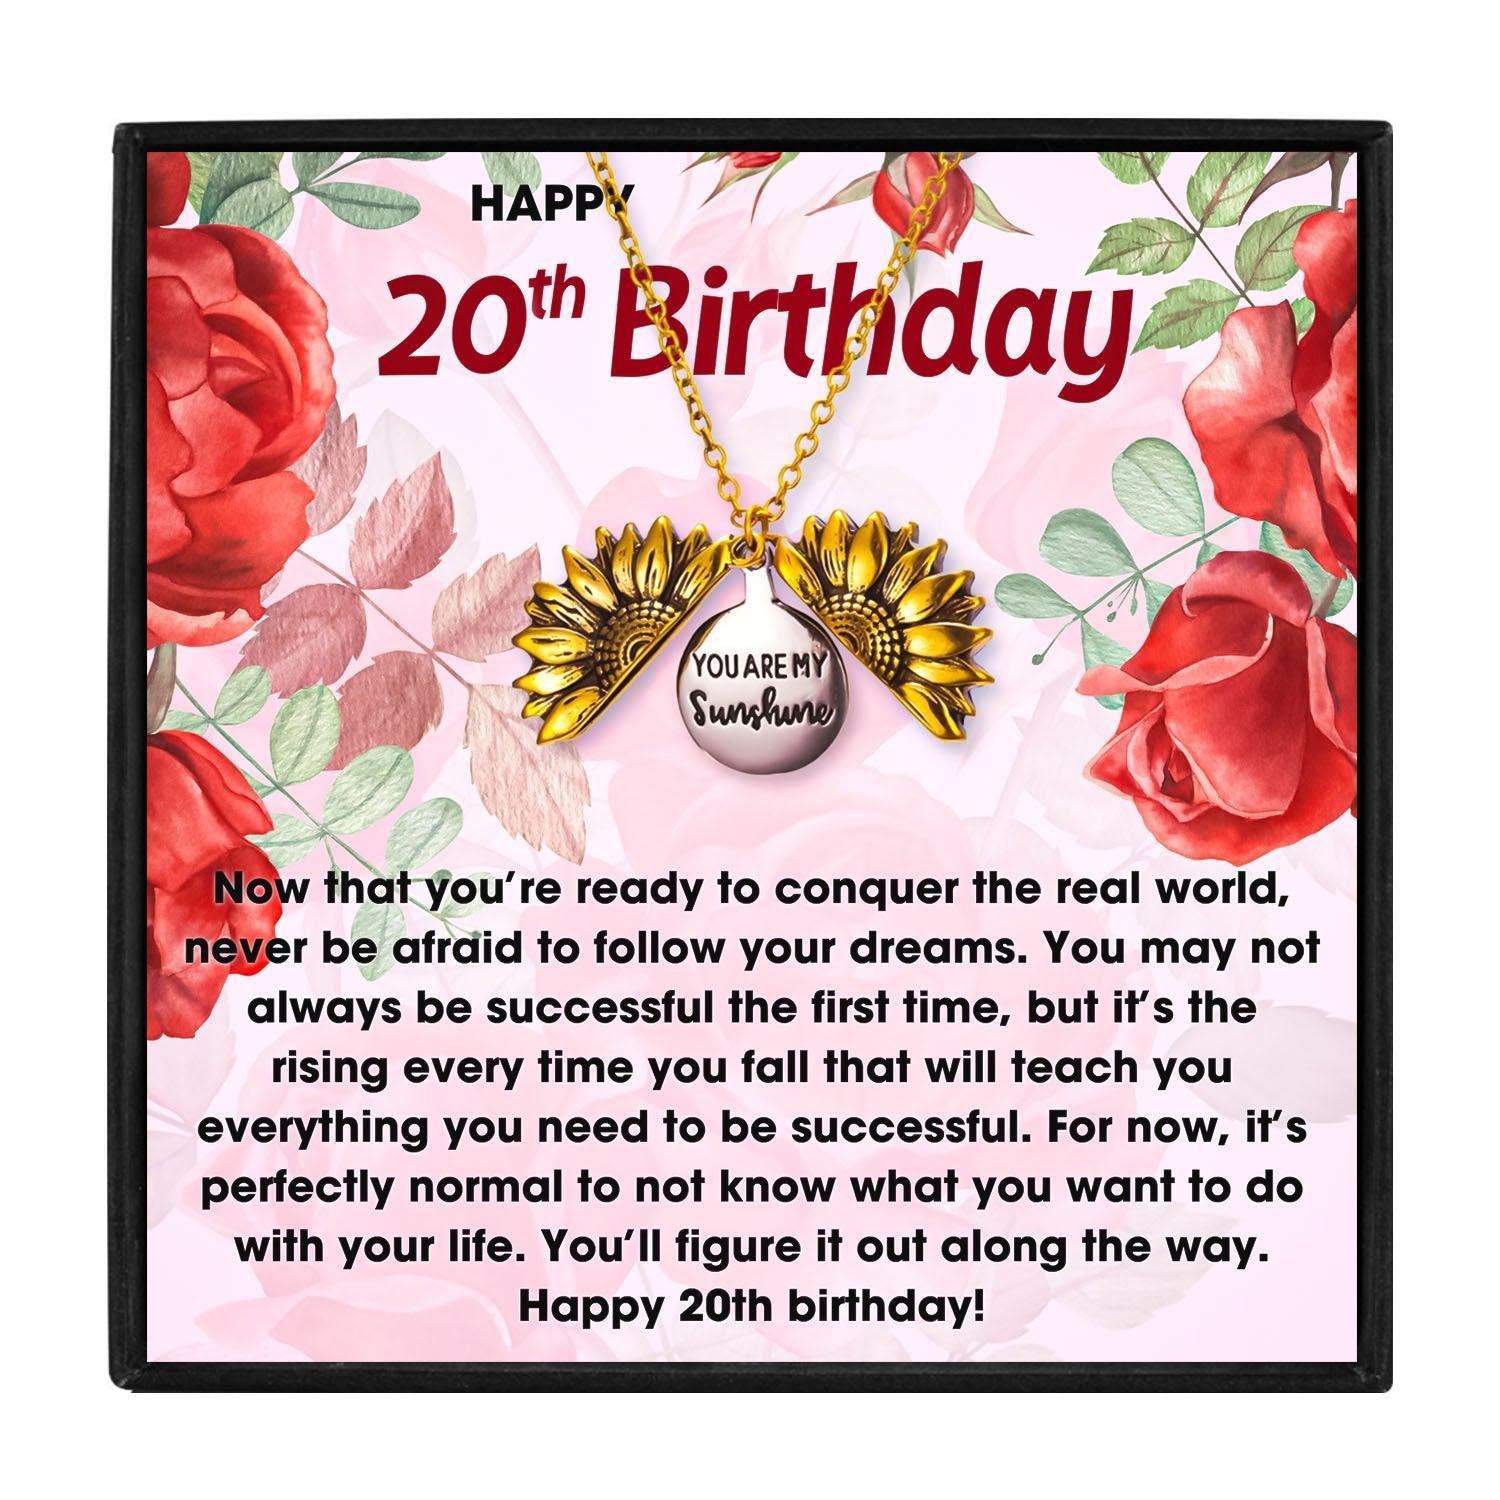 20th Birthday Gifts For Her That They'll Love in 2023 | 20th Birthday Gifts For Her That They'll Love - undefined | 20th birthday gift ideas, 20th birthday gift ideas for daughter, 20th birthday present ideas | From Hunny Life | hunnylife.com